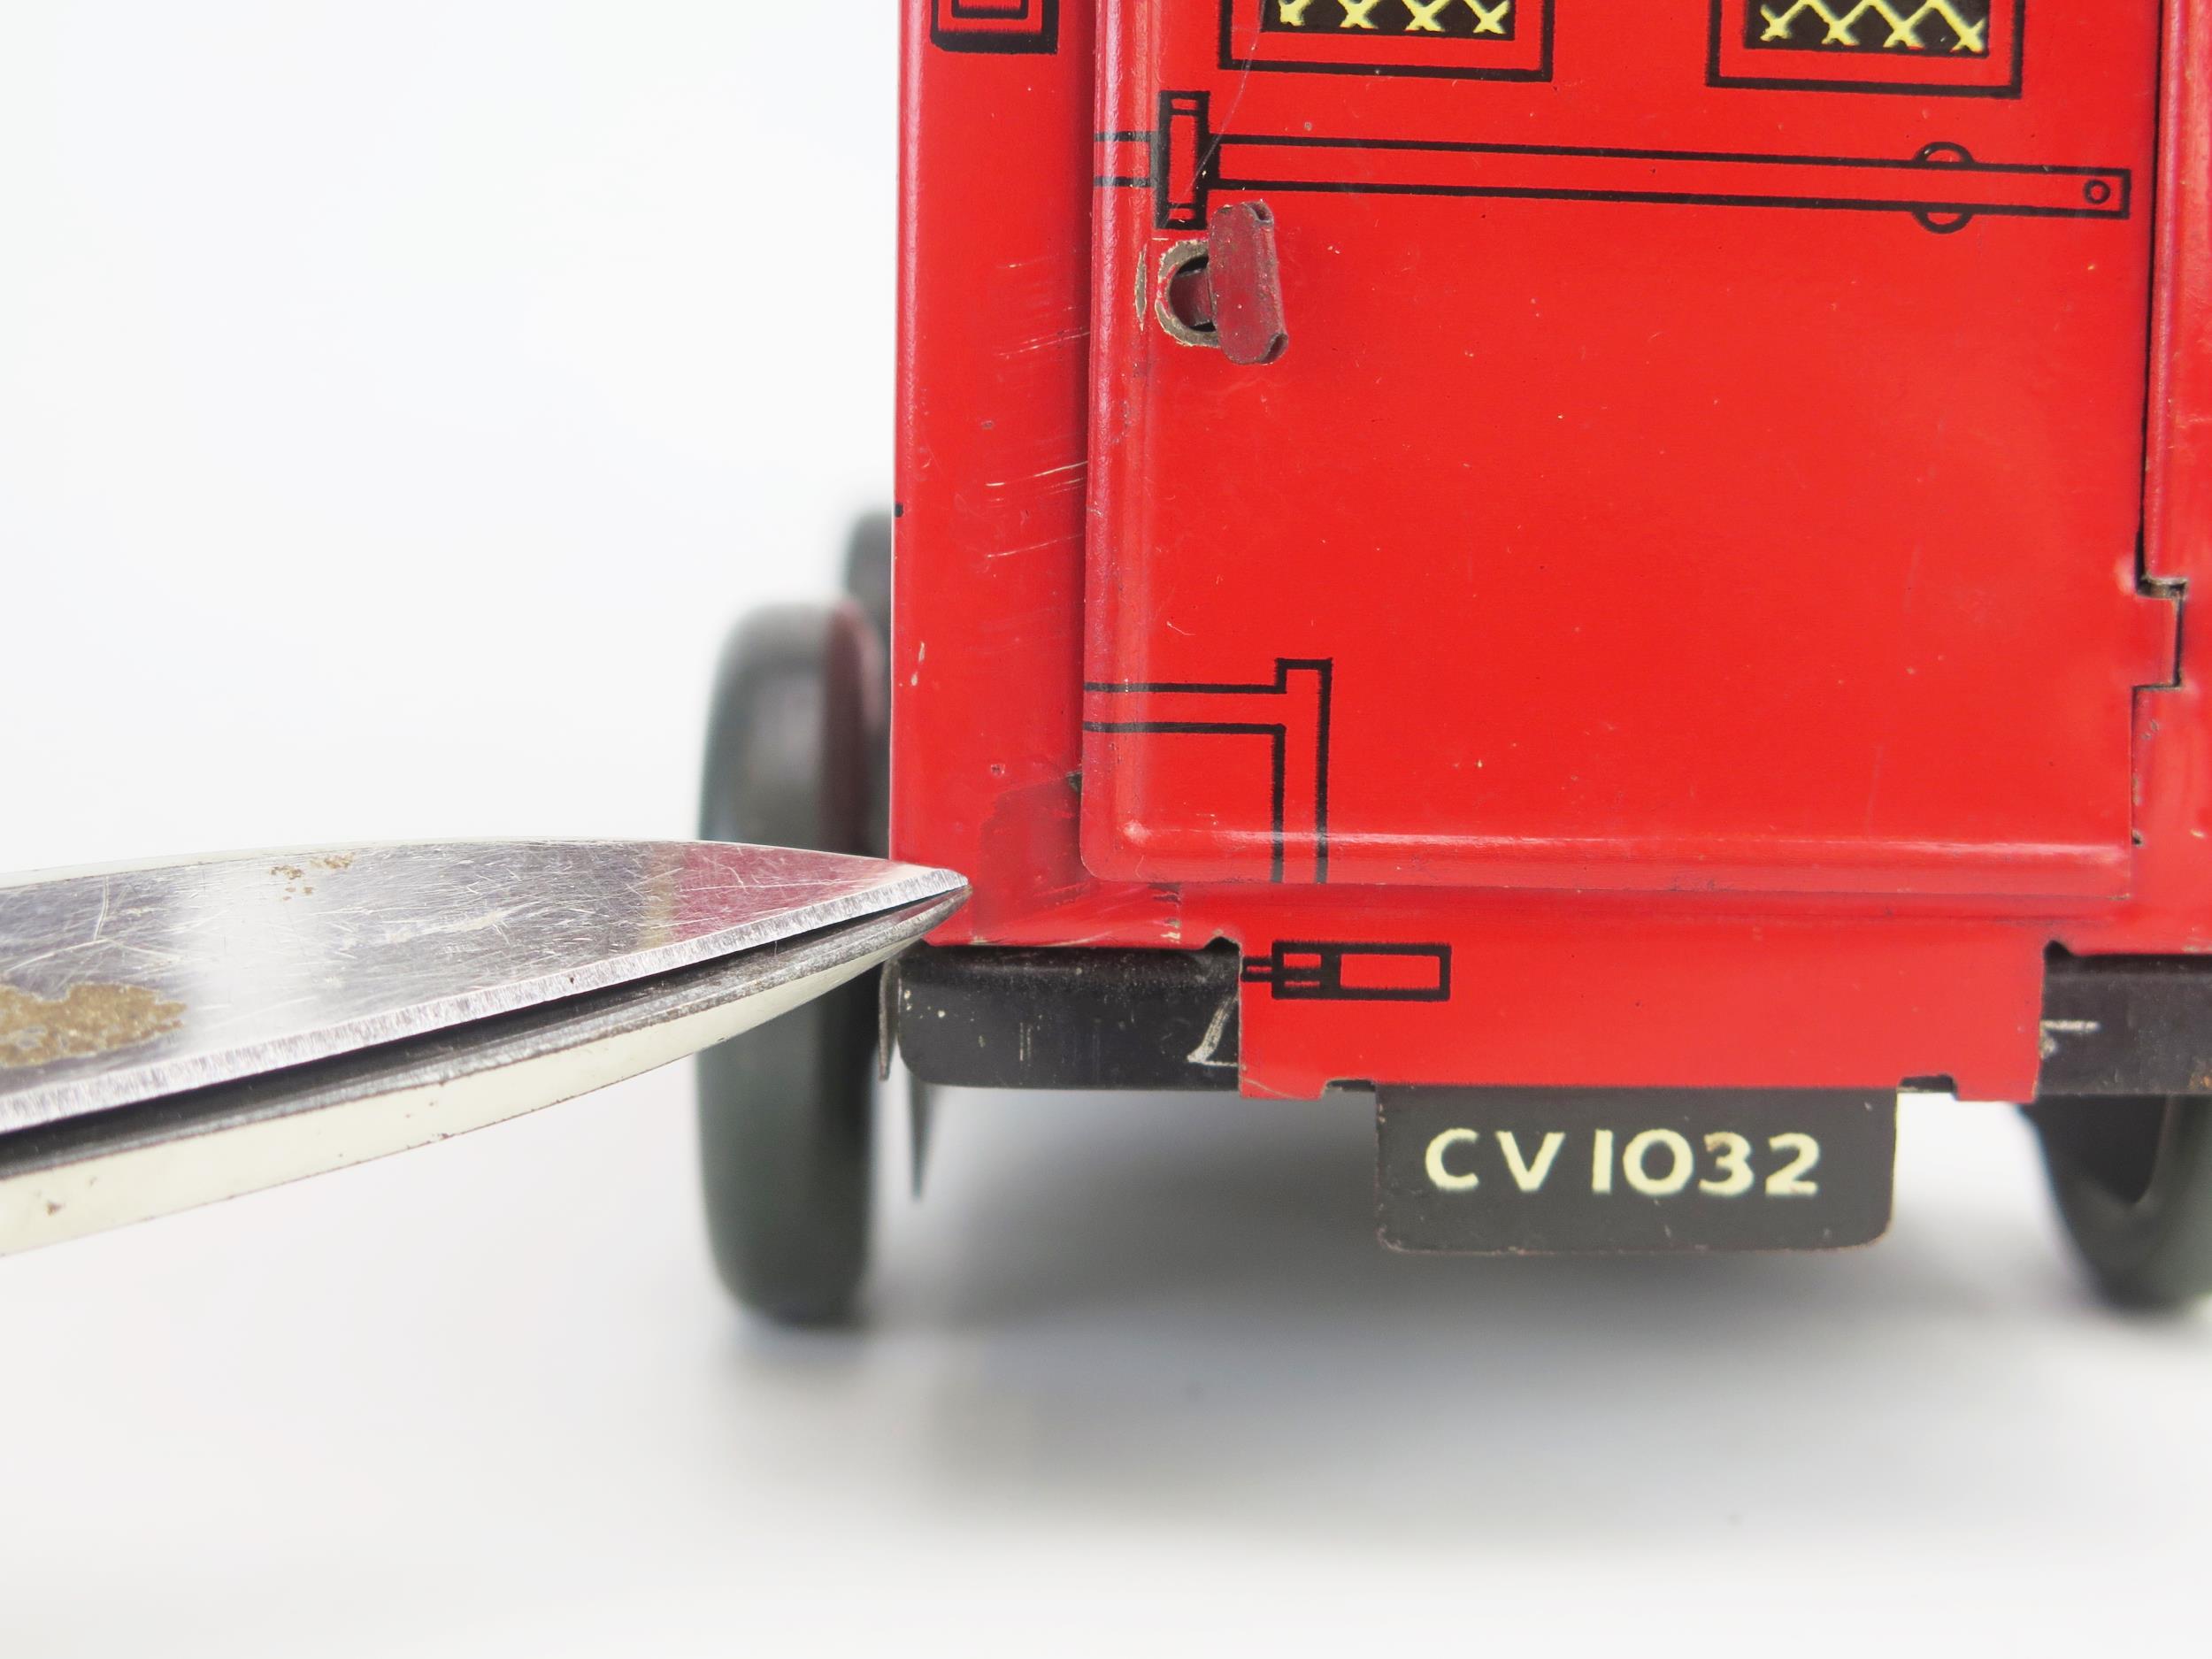 Rare Chad Valley Clockwork Tinplate Royal Mail Van CV 1032 in red "ROYAL MAIL" and "GR VI" crest - Image 8 of 8